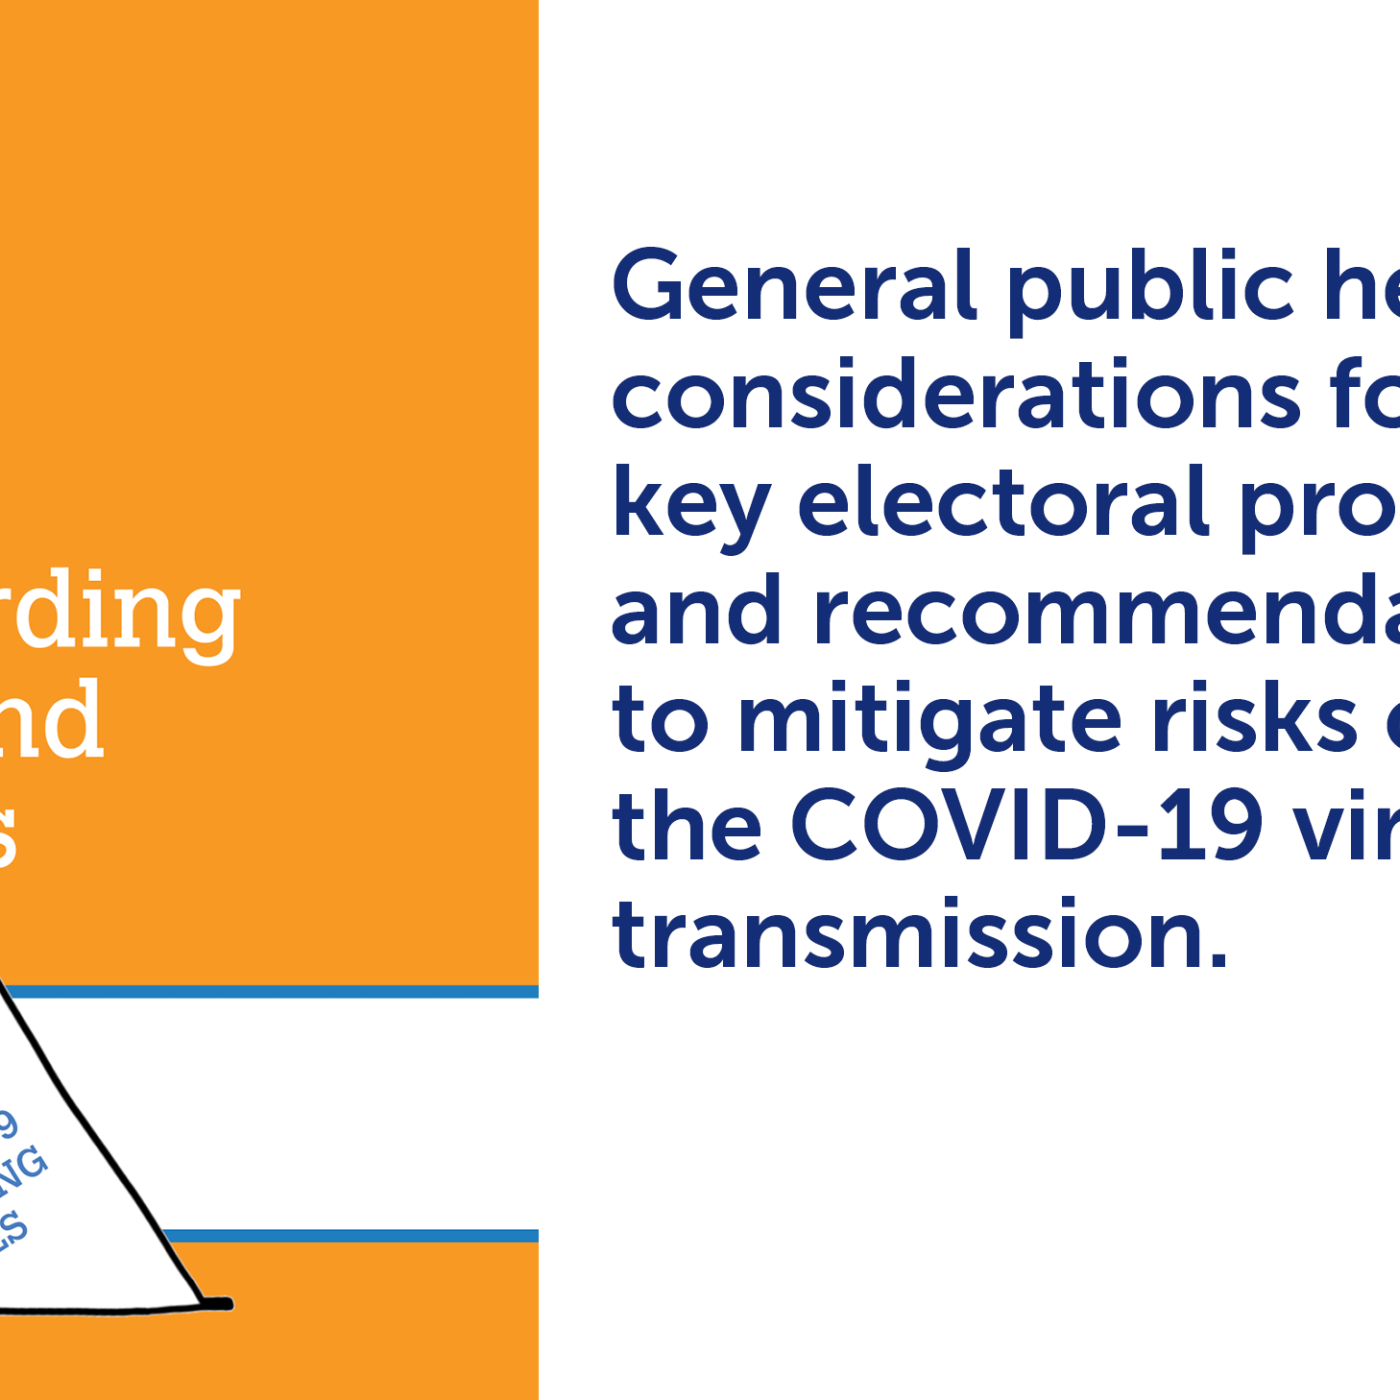 Cover of paper and "General public health considerations for all key electoral processes and recommendations to mitigate risks of the COVID-19 virus transmission."